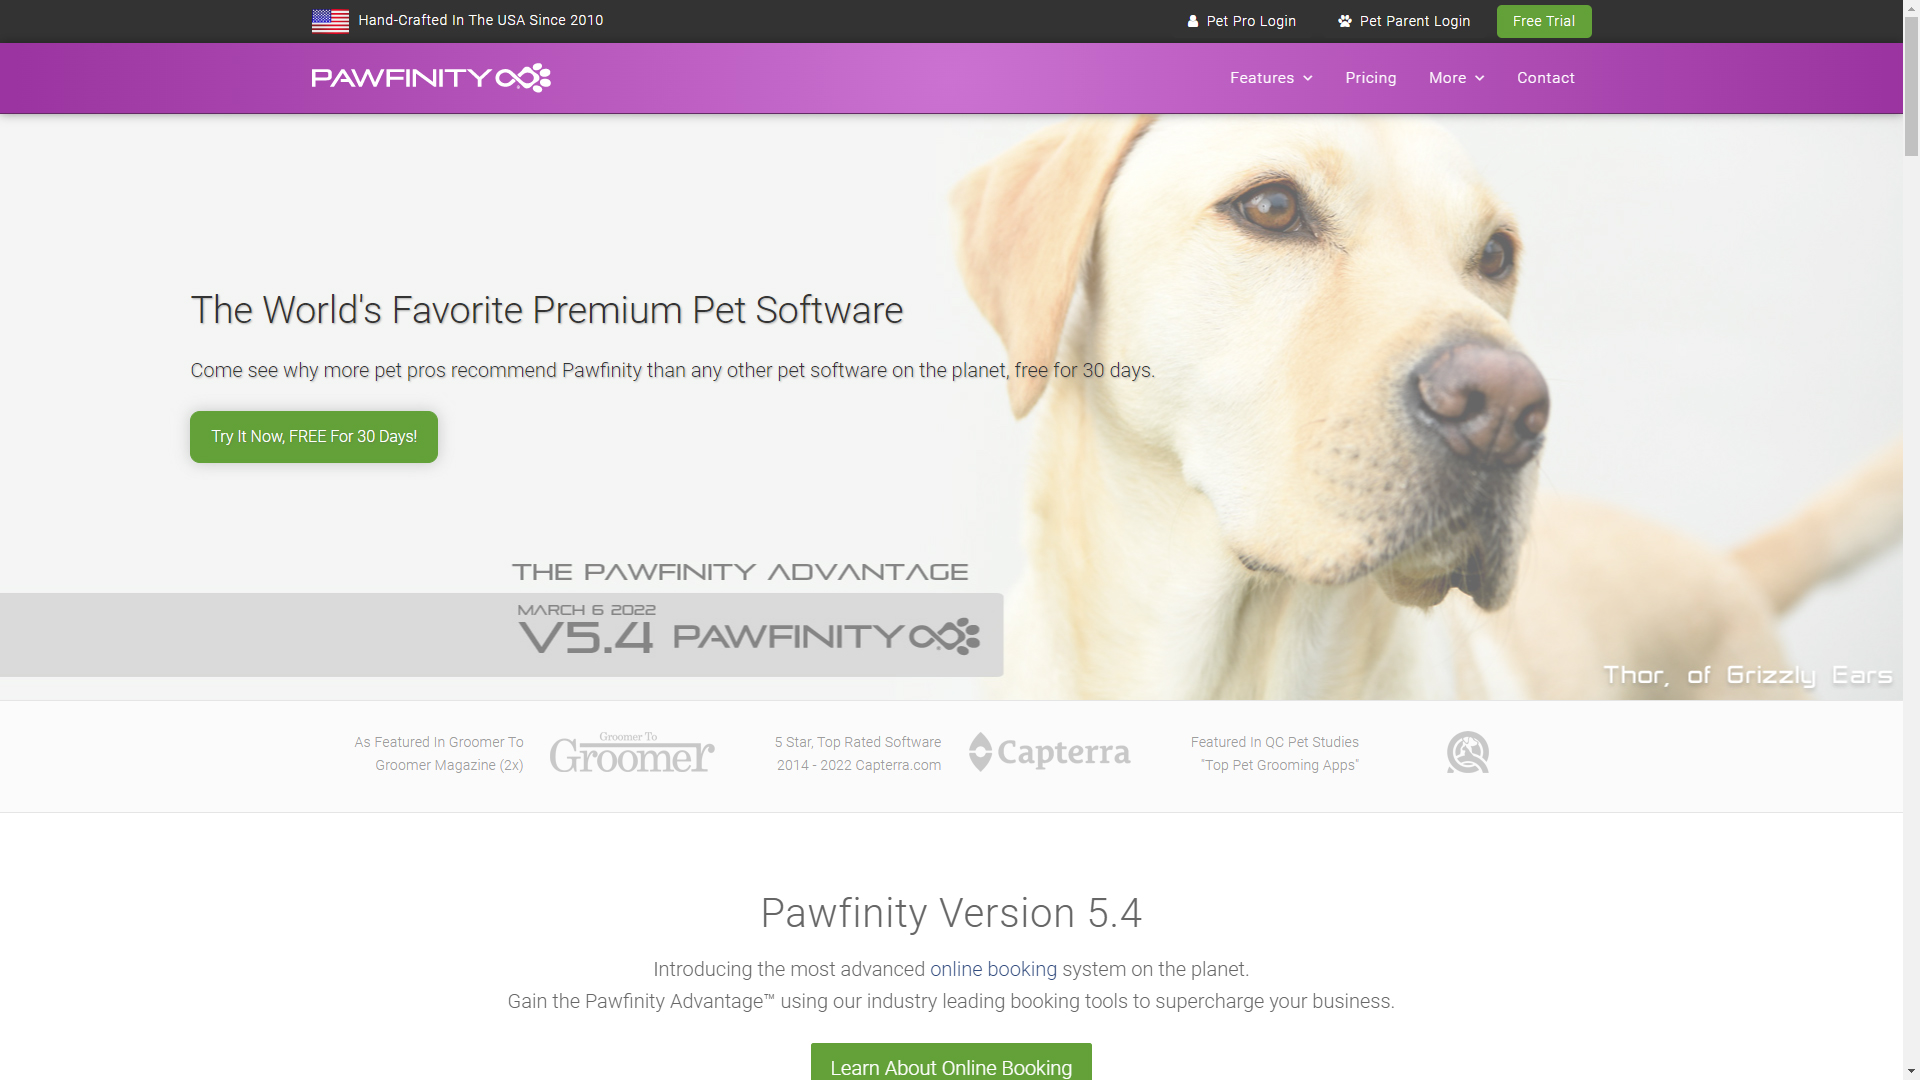 Pawfinity, the world's favorite Premium pet software